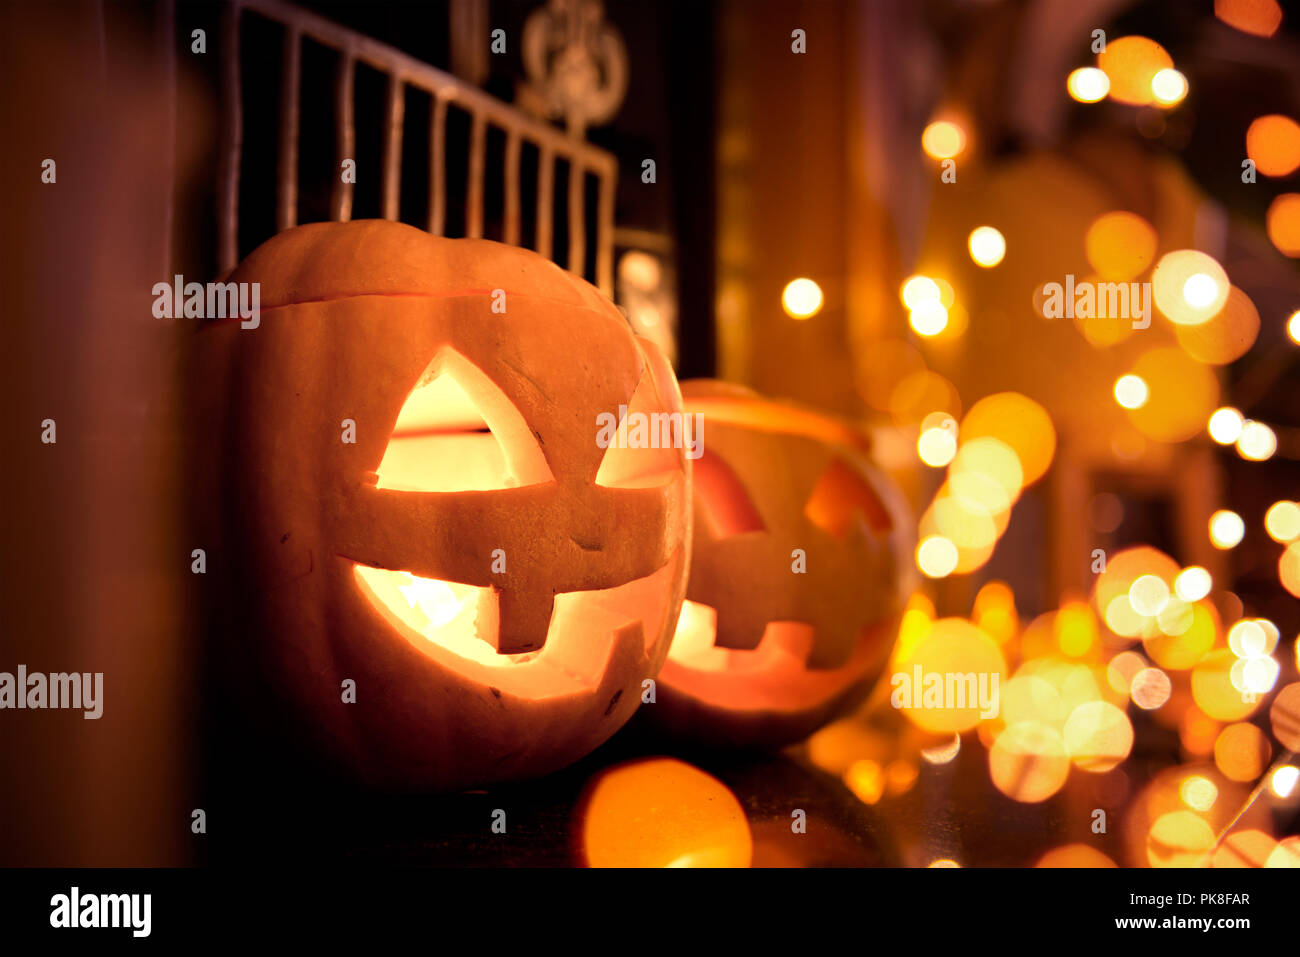 Halloween pumpkins at home on a fireplace with sparkling lights. Cosy autumn background. Stock Photo